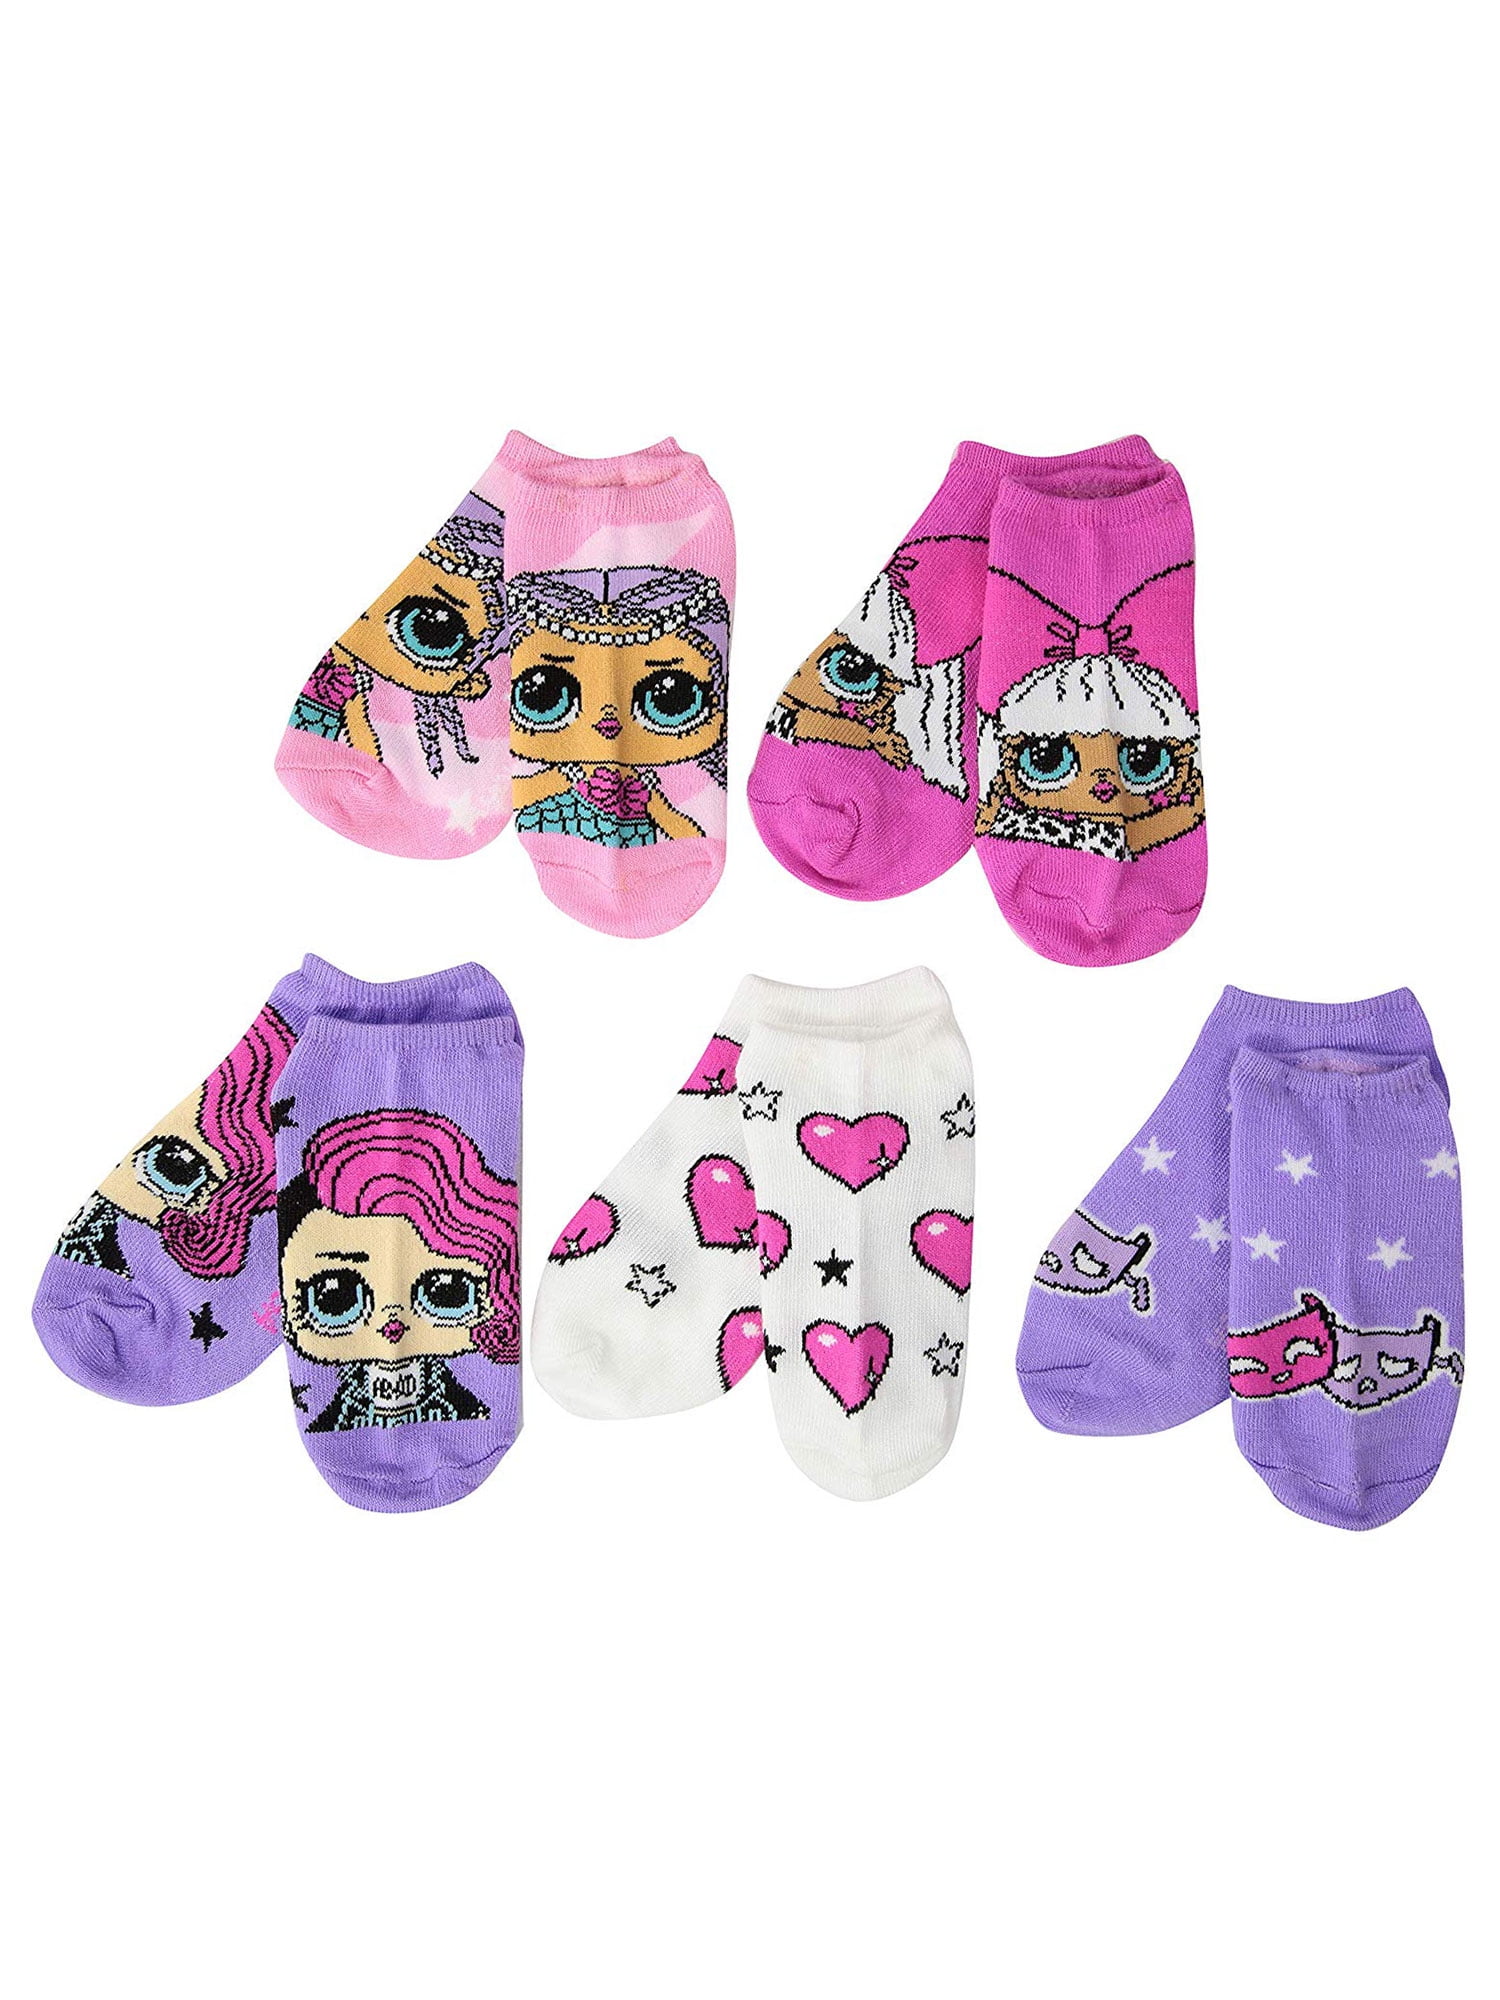 Elena of Avalor Colorful 5 Pack No Show Girls Socks Size M 7.5-3.5